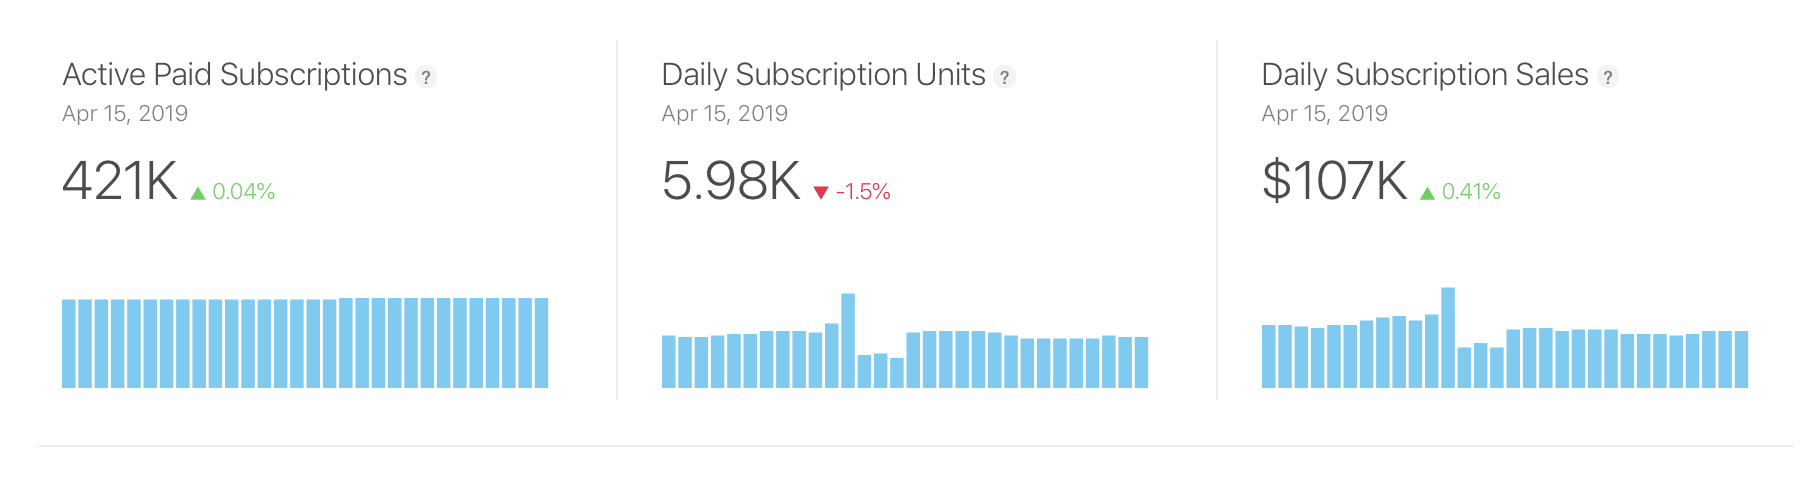 View active subscriptions data